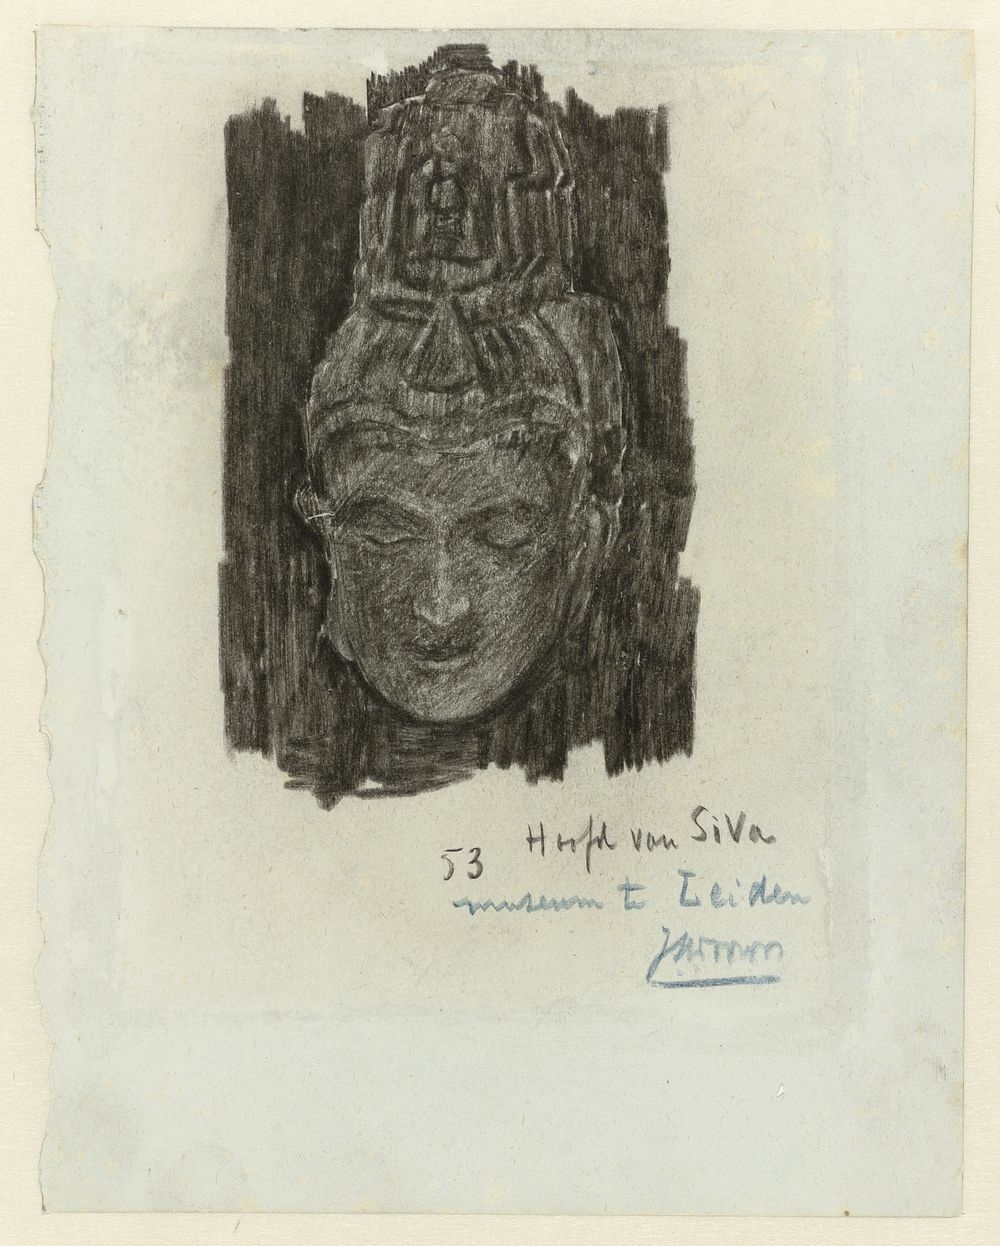 Study of head of Shiva in the Museum of Ethnology in Leiden (1868&ndash;1928) by Jan Toorop. Original public domain image…